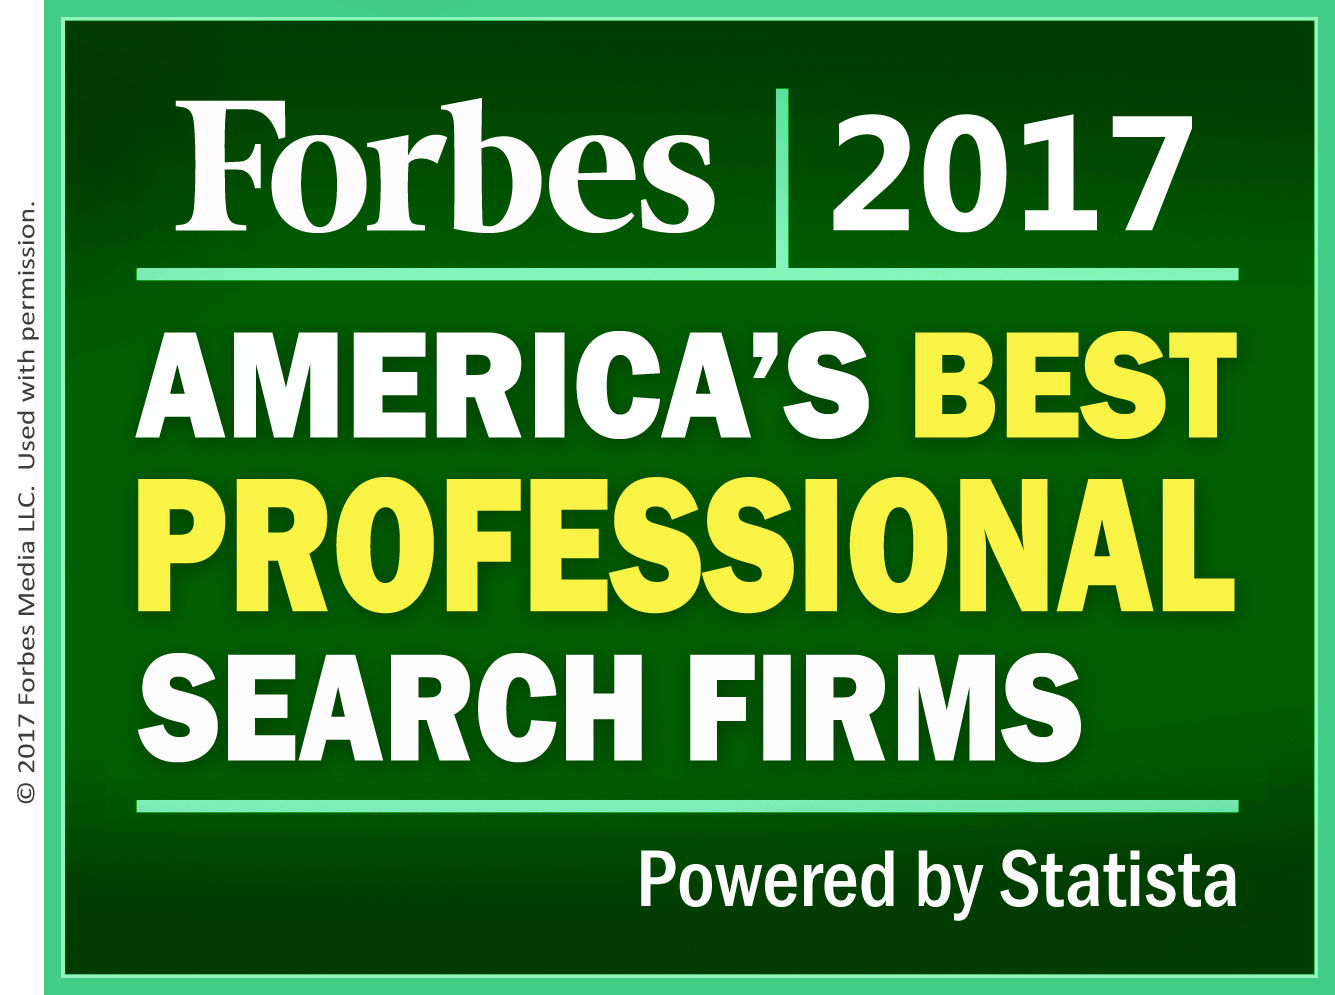 CulverCareers Recognized as One of America's Best Professional